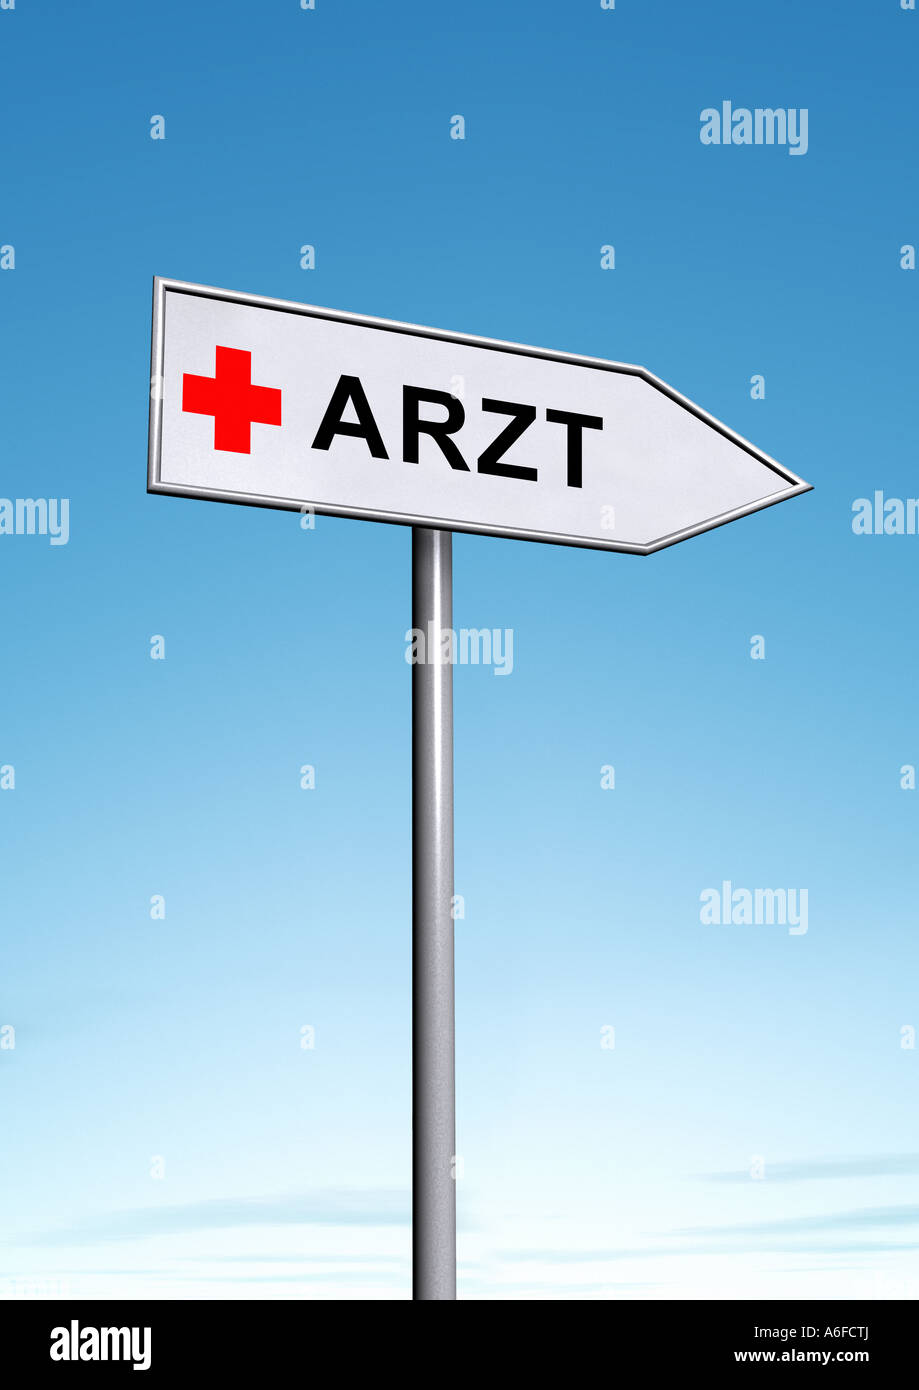 physician Arzt Stock Photo